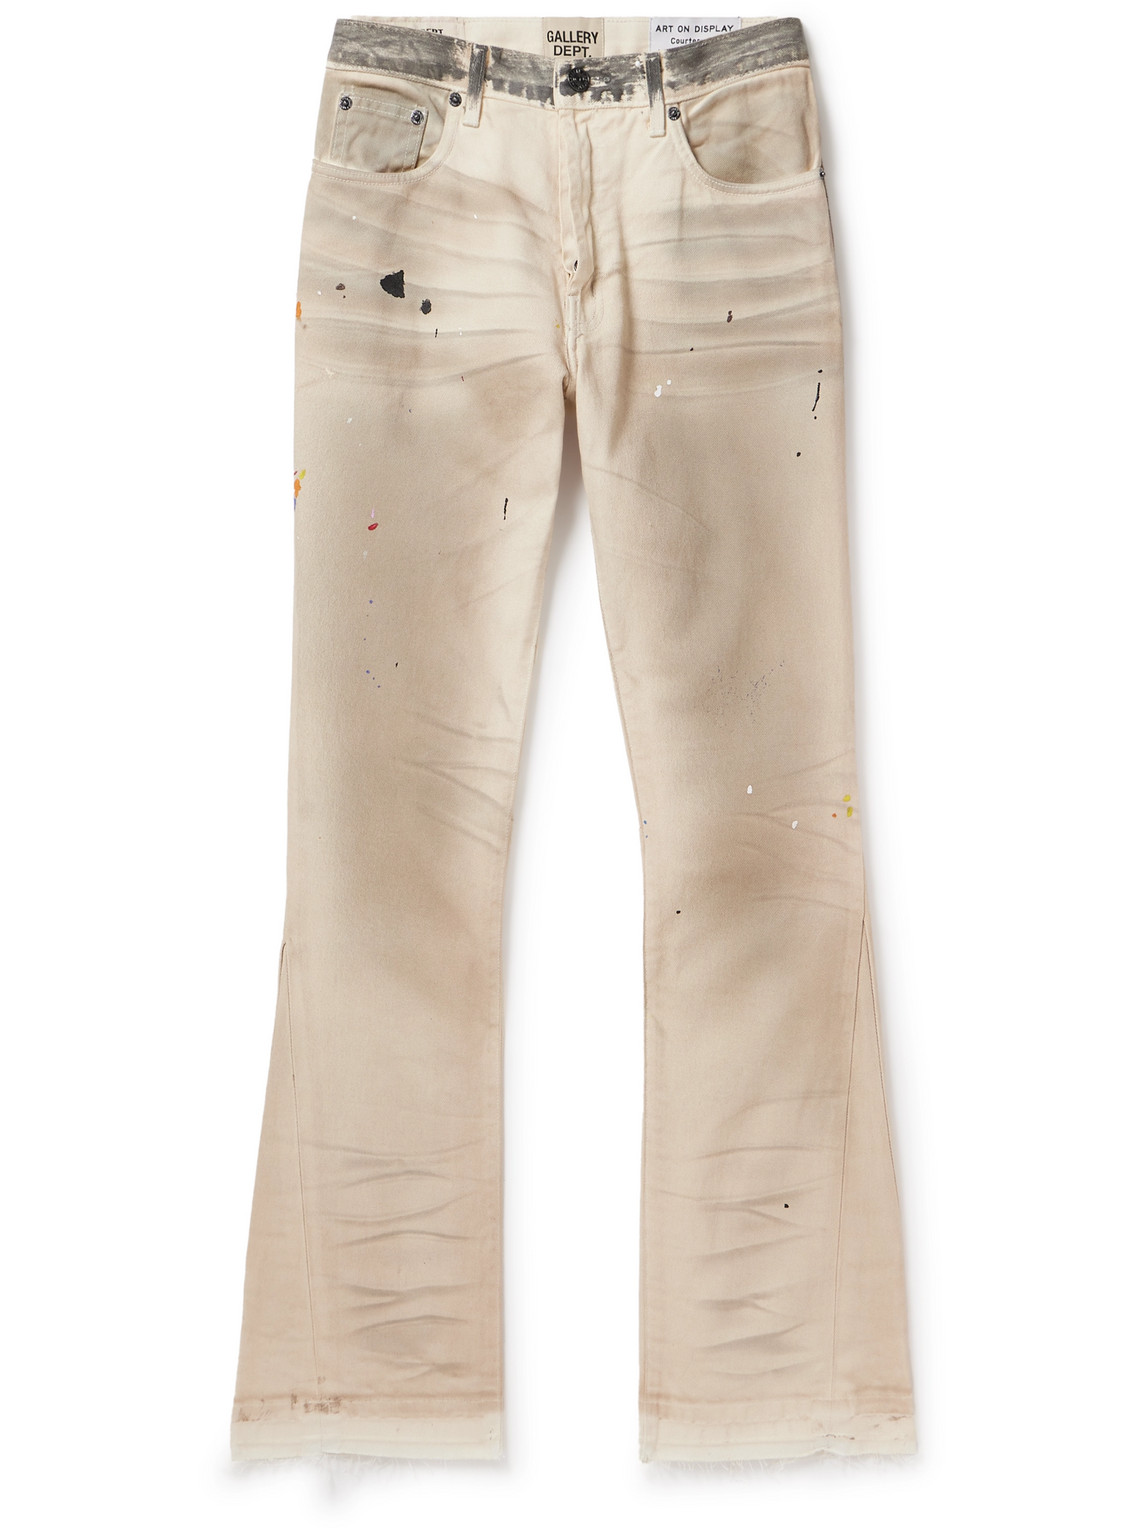 Gallery Dept. Hollywood Flared Distressed Paint-splattered Jeans In Neutrals